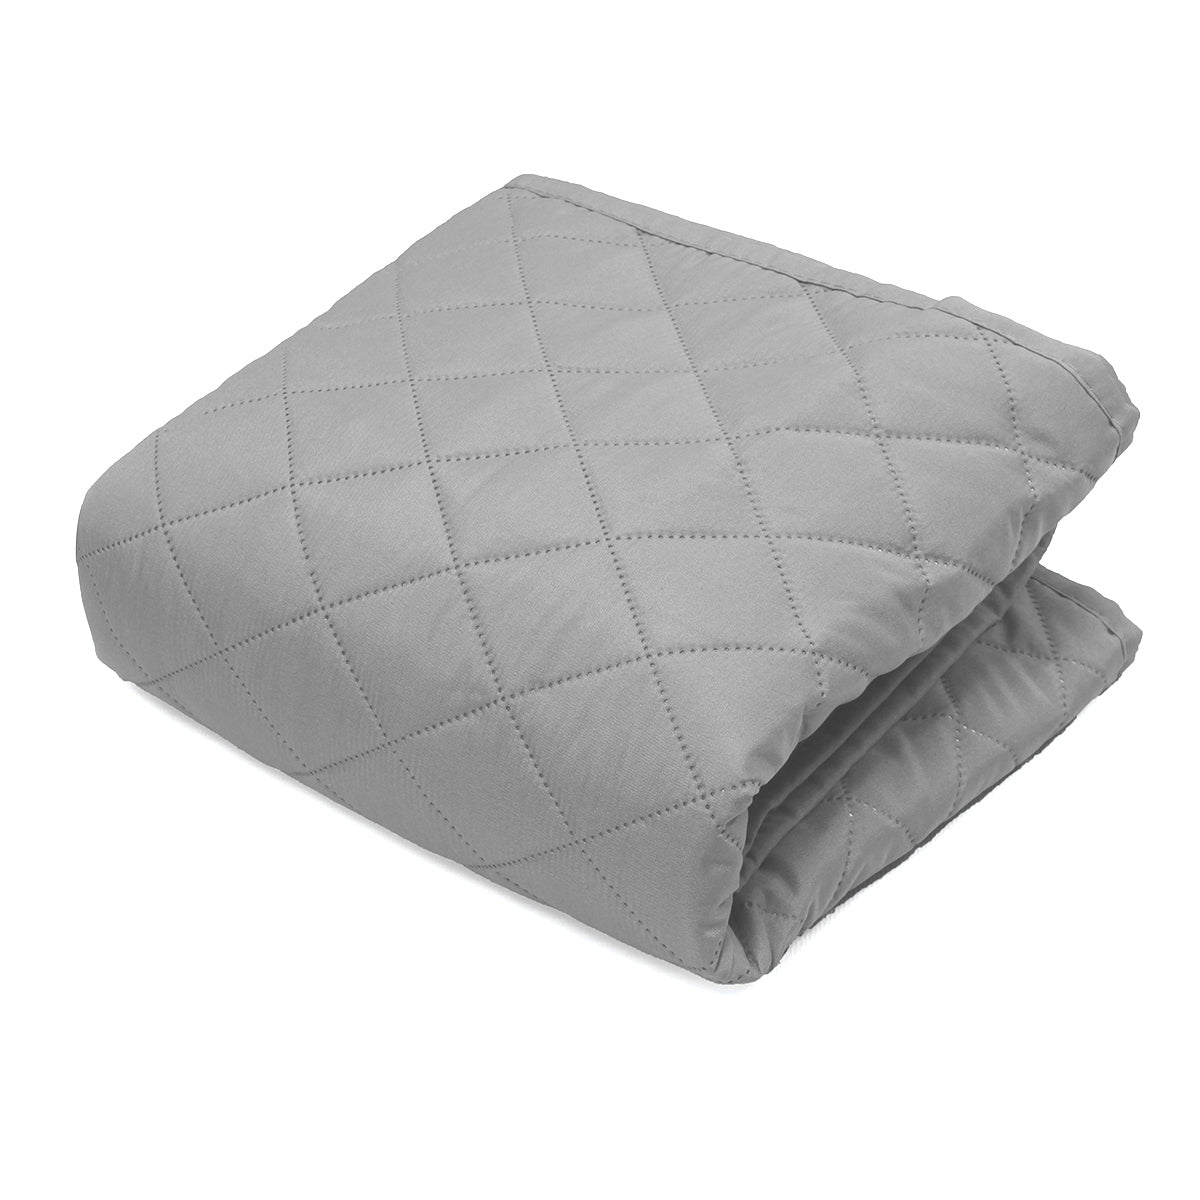 Light Gray Pet Sofa Couch Protective Cover Removable W/Strap Waterproof 1 Seater Sofa Cover